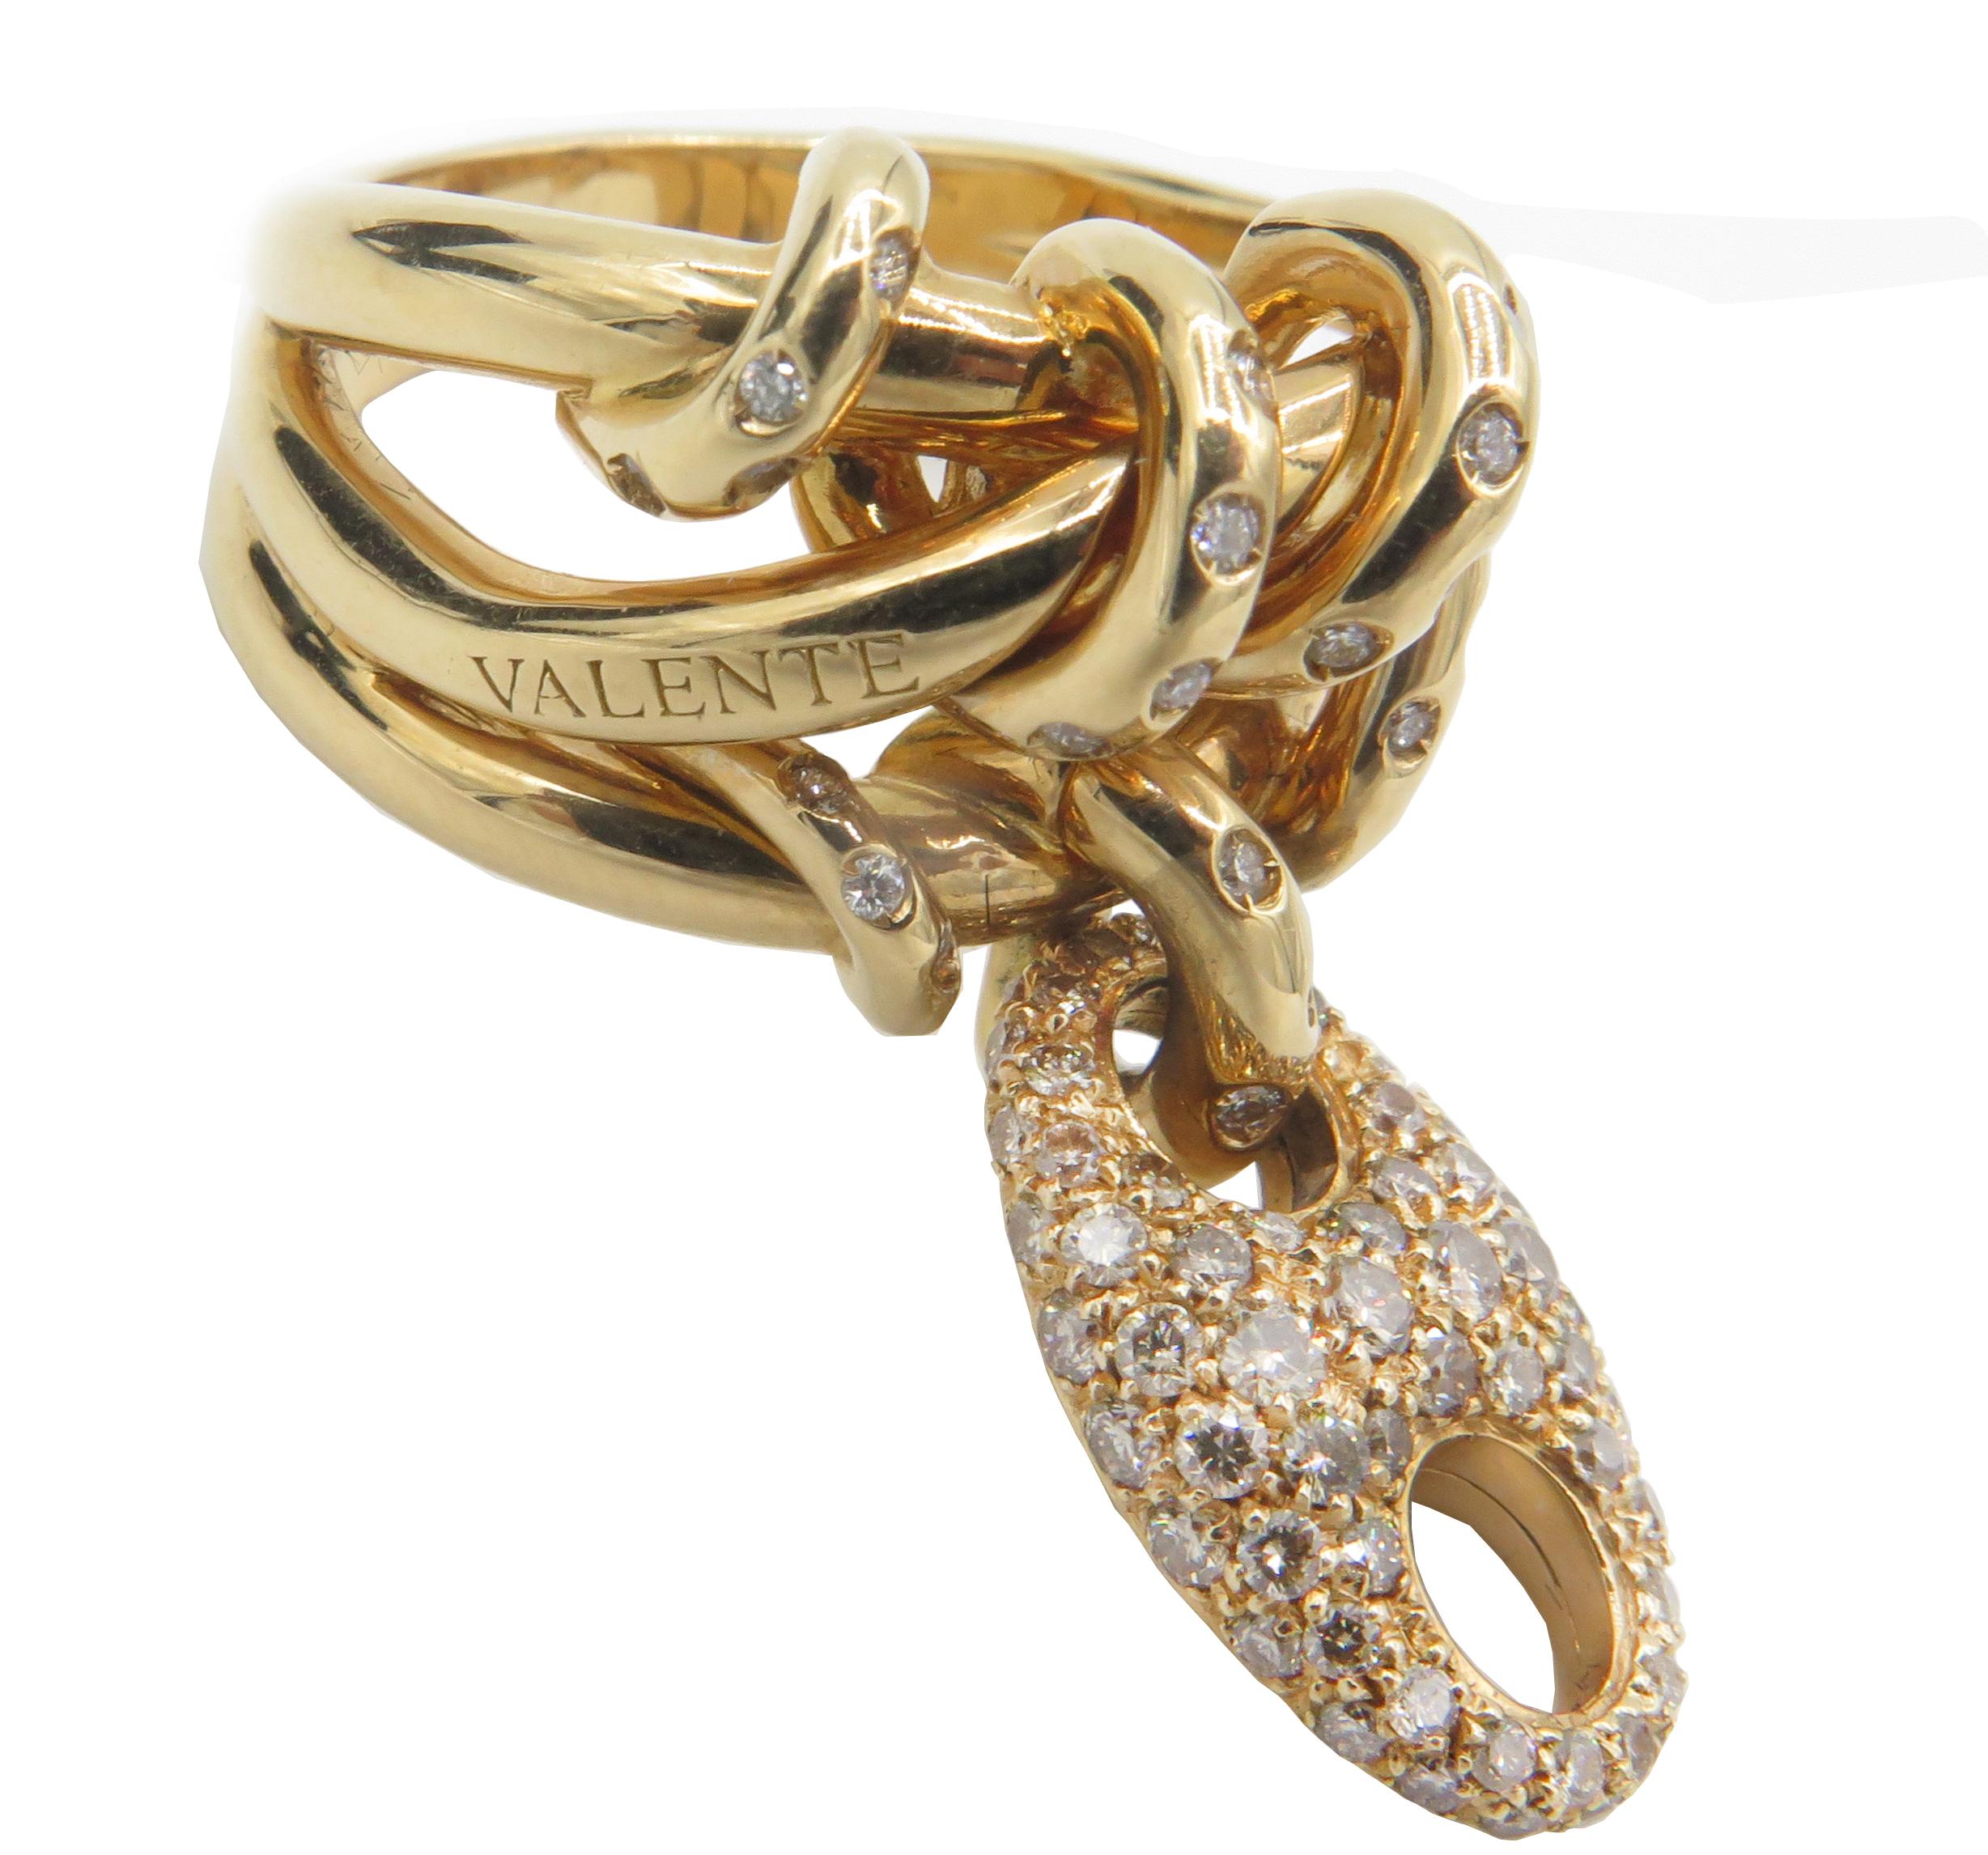 This is remarkably beautiful 18k yellow gold ring from Valente Milano, designed by John Galliano. The golden sculptural curls and designs of the ring are studded with round, brilliant white diamonds. An 18k yellow gold signature Valente charm,